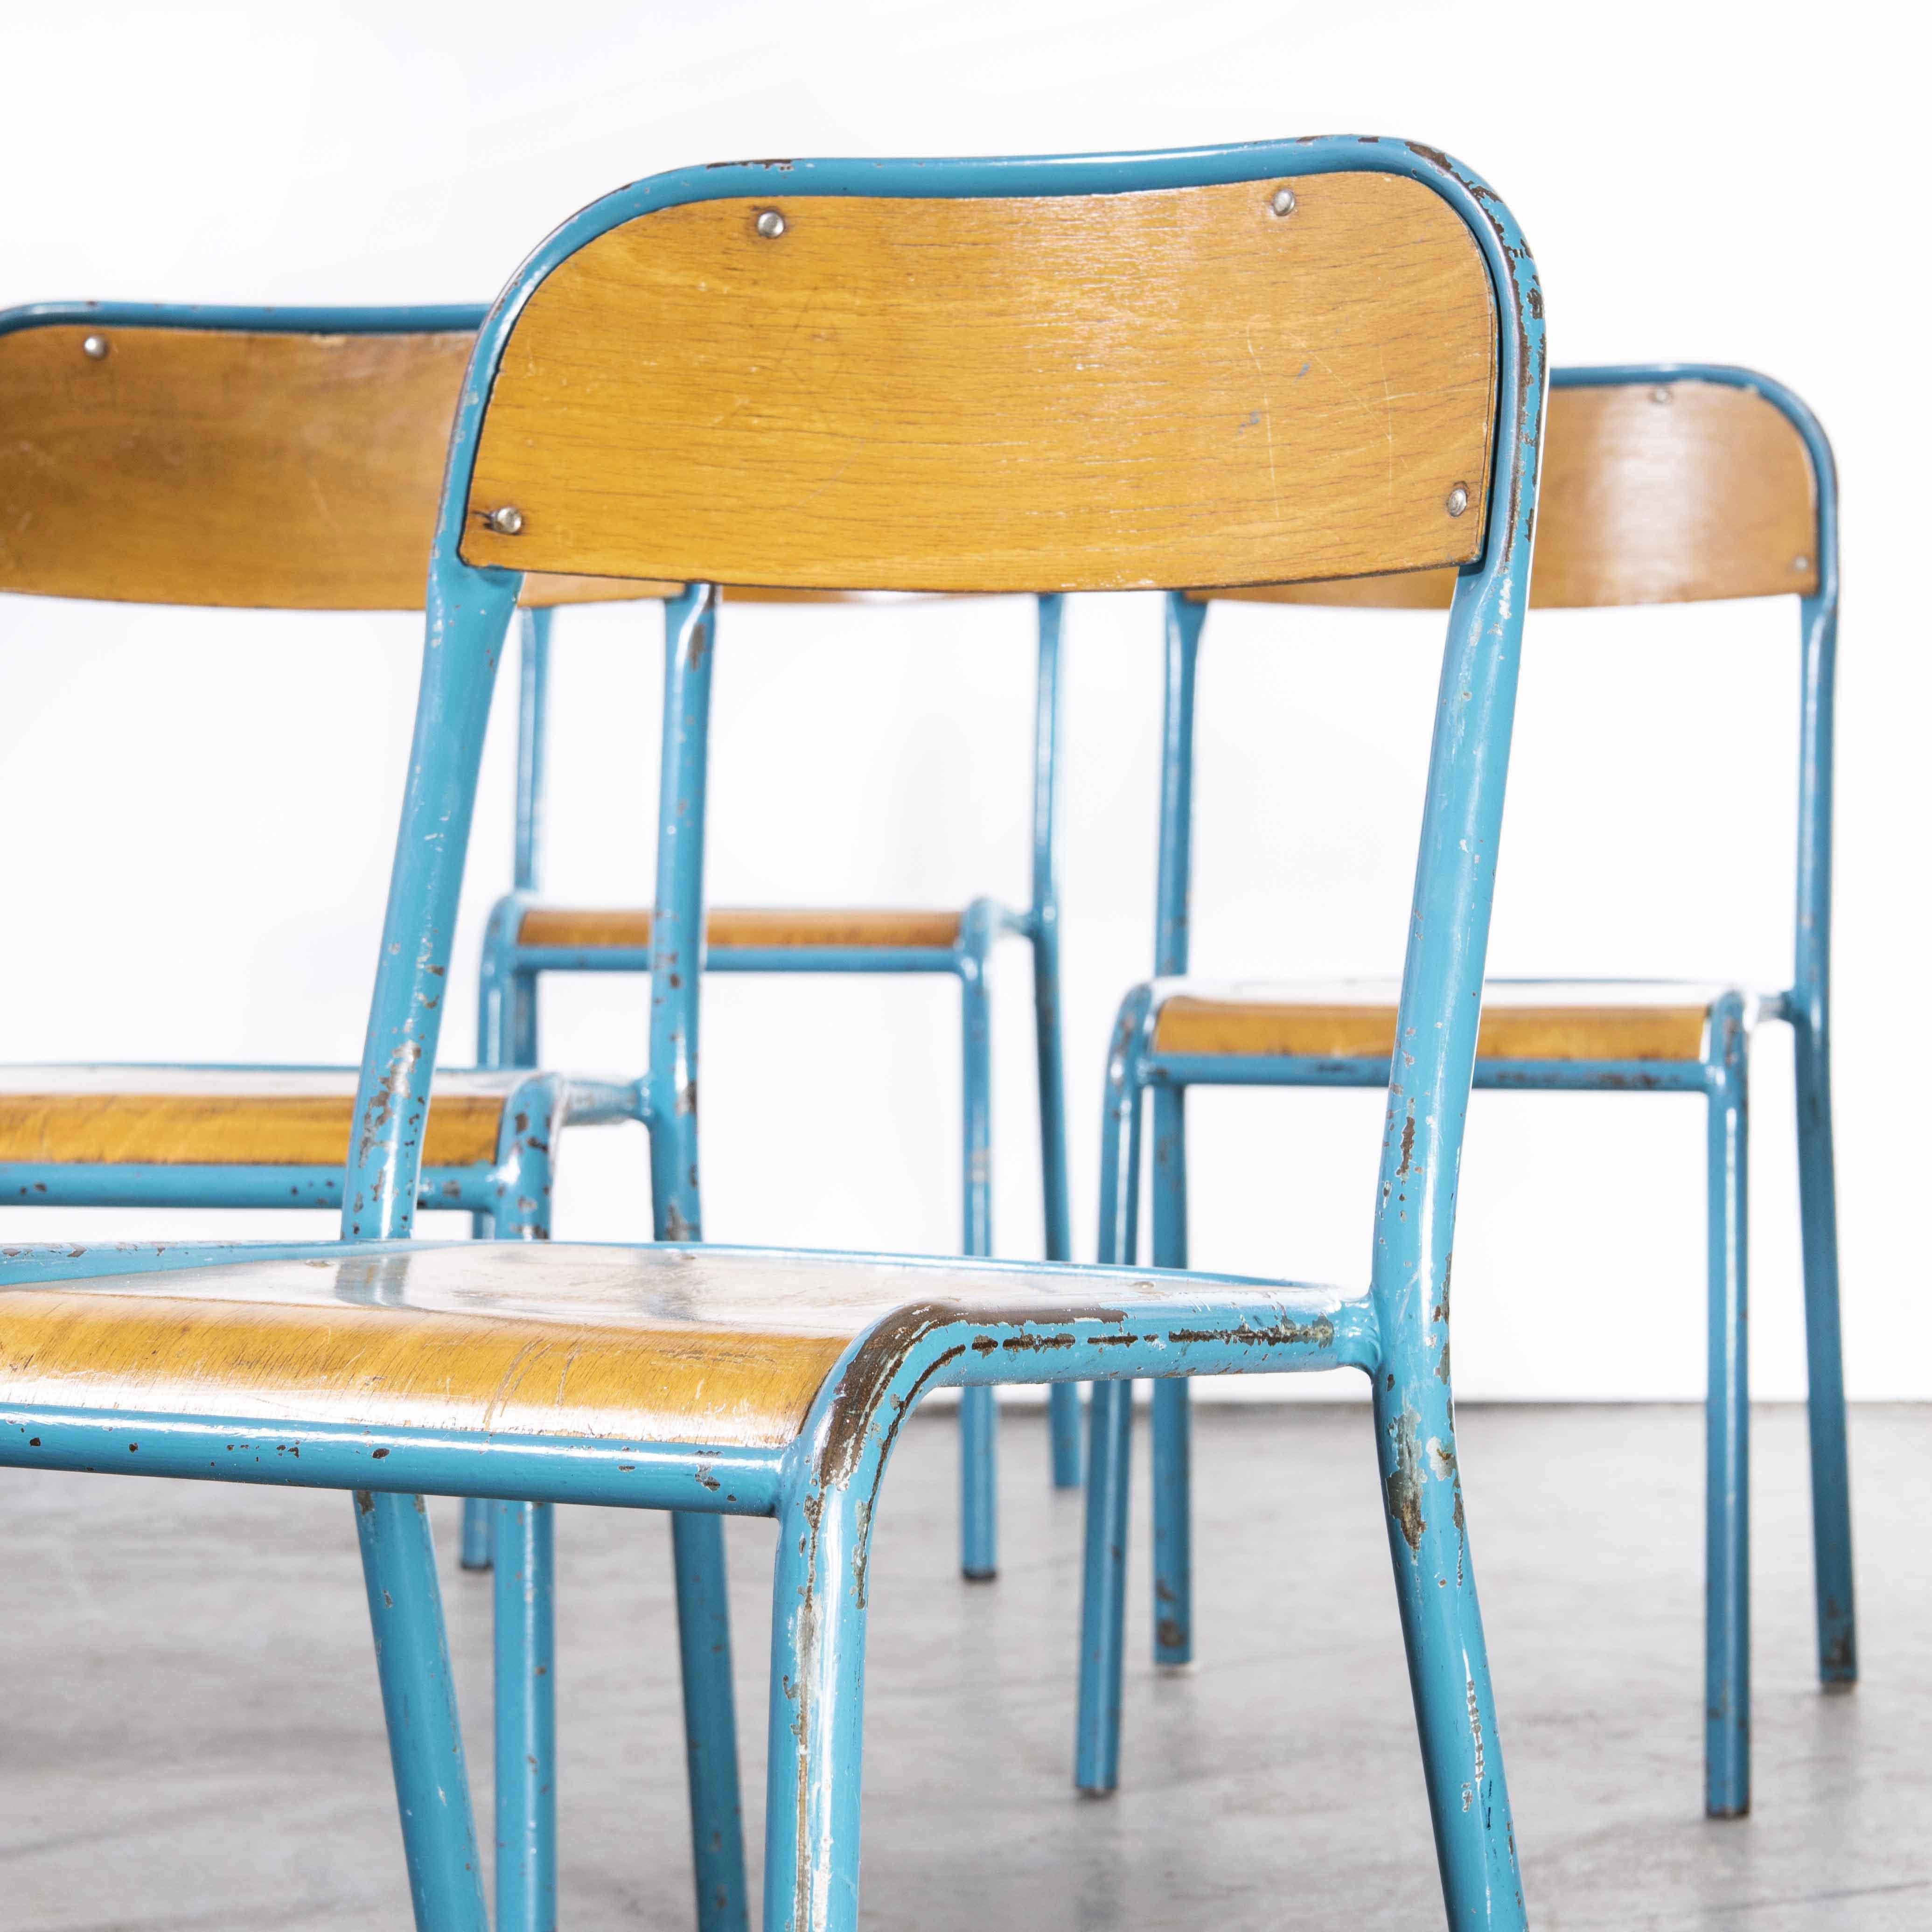 1970's French Mullca Stacking Chair, Light Blue 3, Various Quantities Available 3